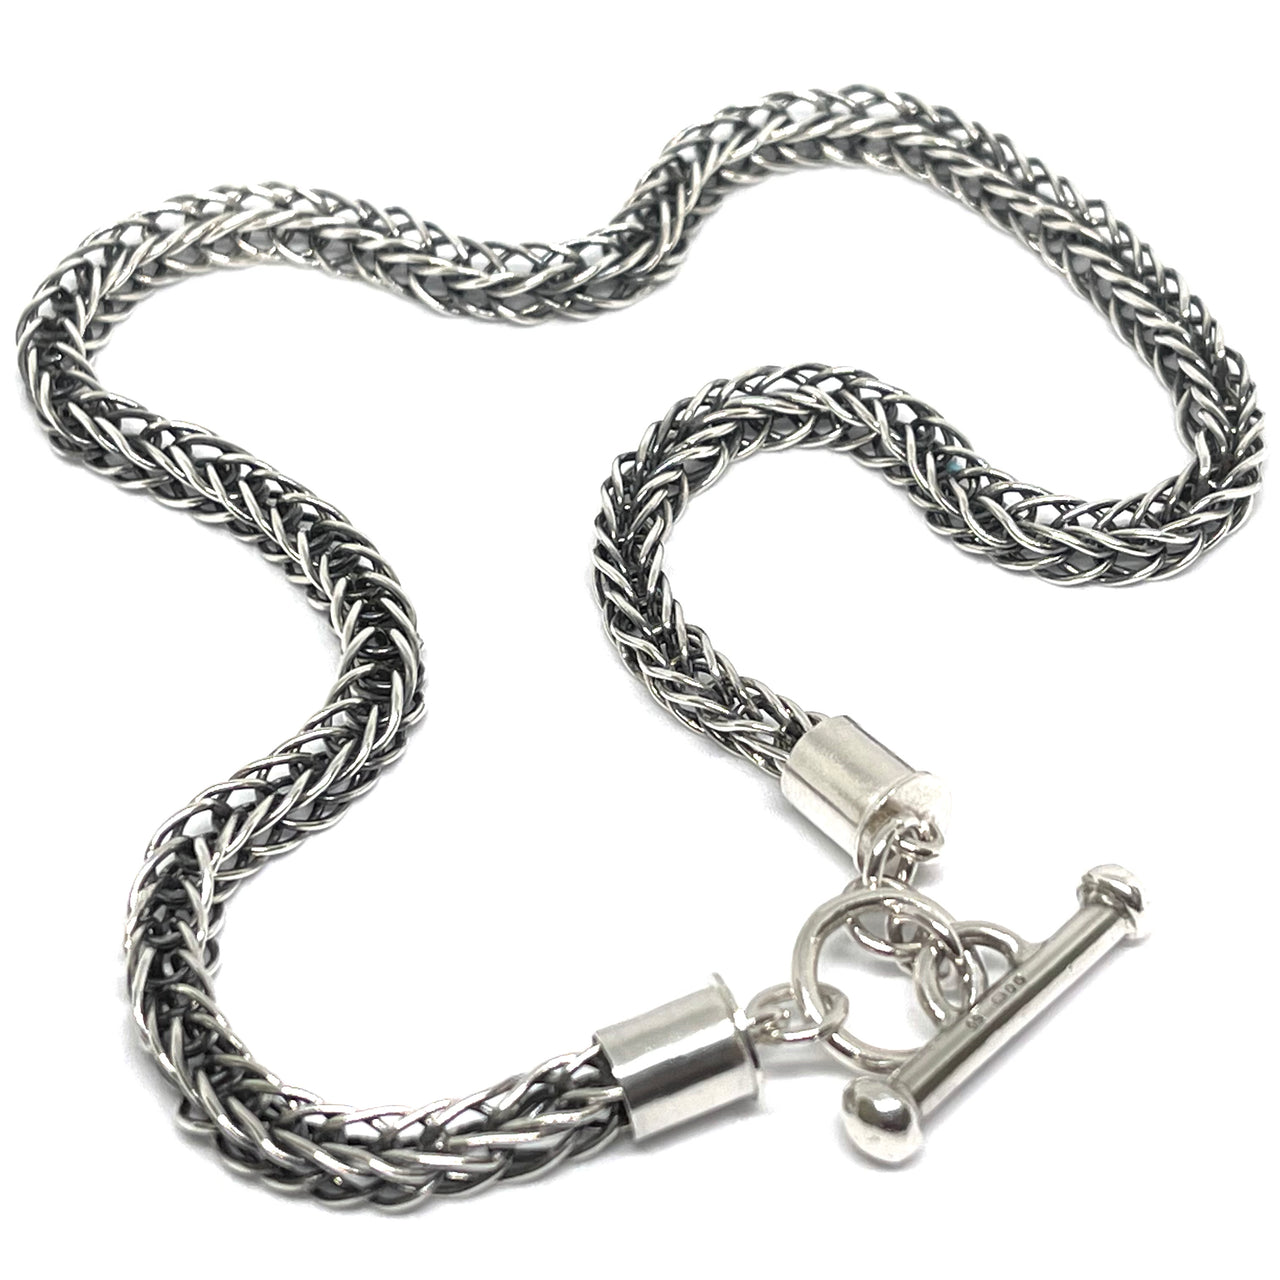 Rope Chain with T Bar Closure | No Pendant |